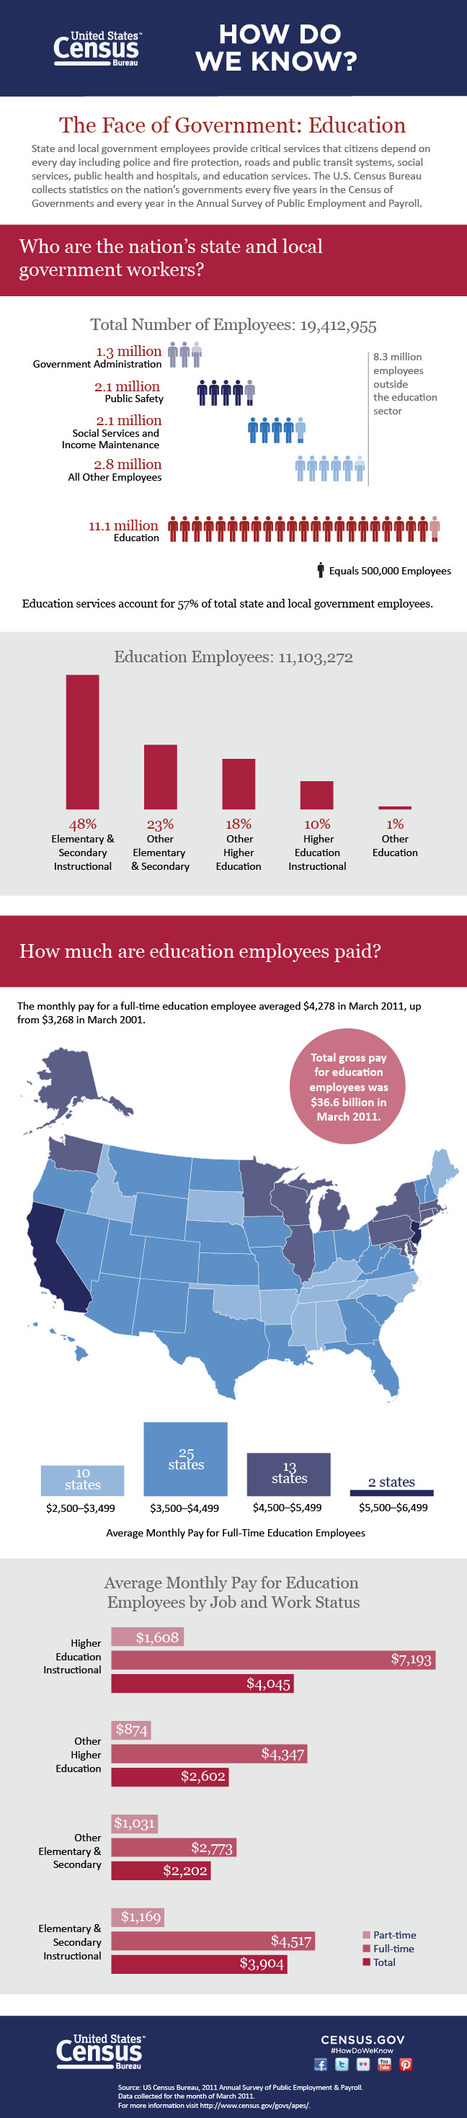 Teacher Salaries: Everything You Wanted To Know [Infographic] | Didactics and Technology in Education | Scoop.it